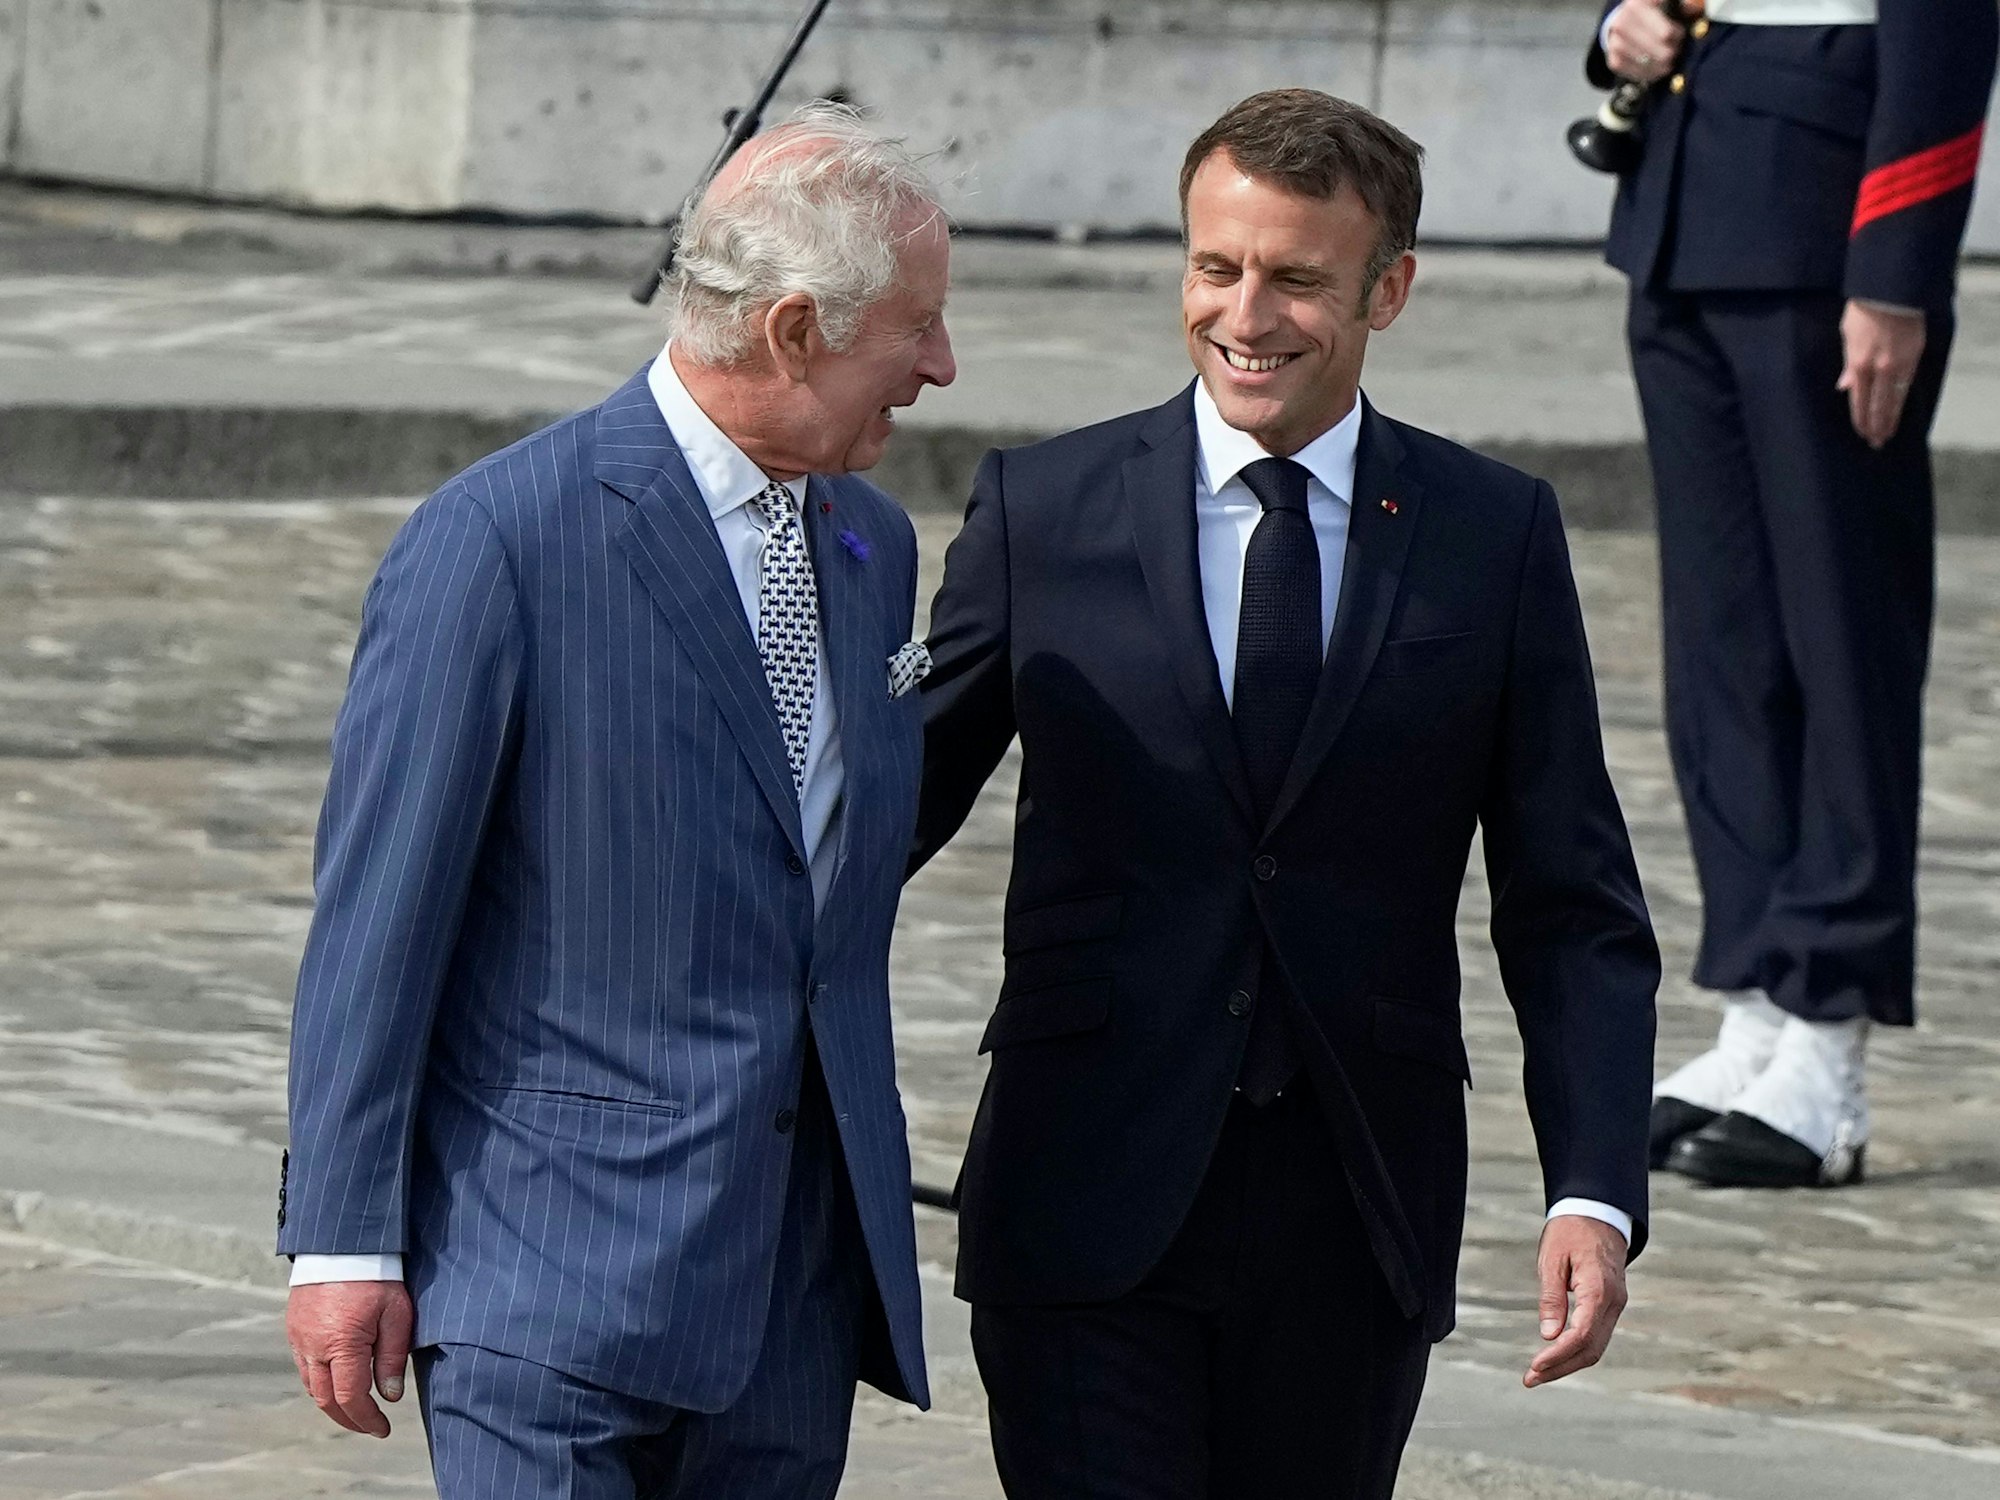 French President Emmanuel Macron, right, and Britain's King Charles III attend a ceremony at the Arc de Triomphe, Wednesday, Sept. 20, 2023 in Paris. King Charles III of the United Kingdom starts a three-day state visit to France on Wednesday meant to highlight the friendship between the two nations with great pomp, after the trip was postponed in March amid widespread demonstrations against President Emmanuel Macron's pension changes. (AP Photo/Michel Euler)